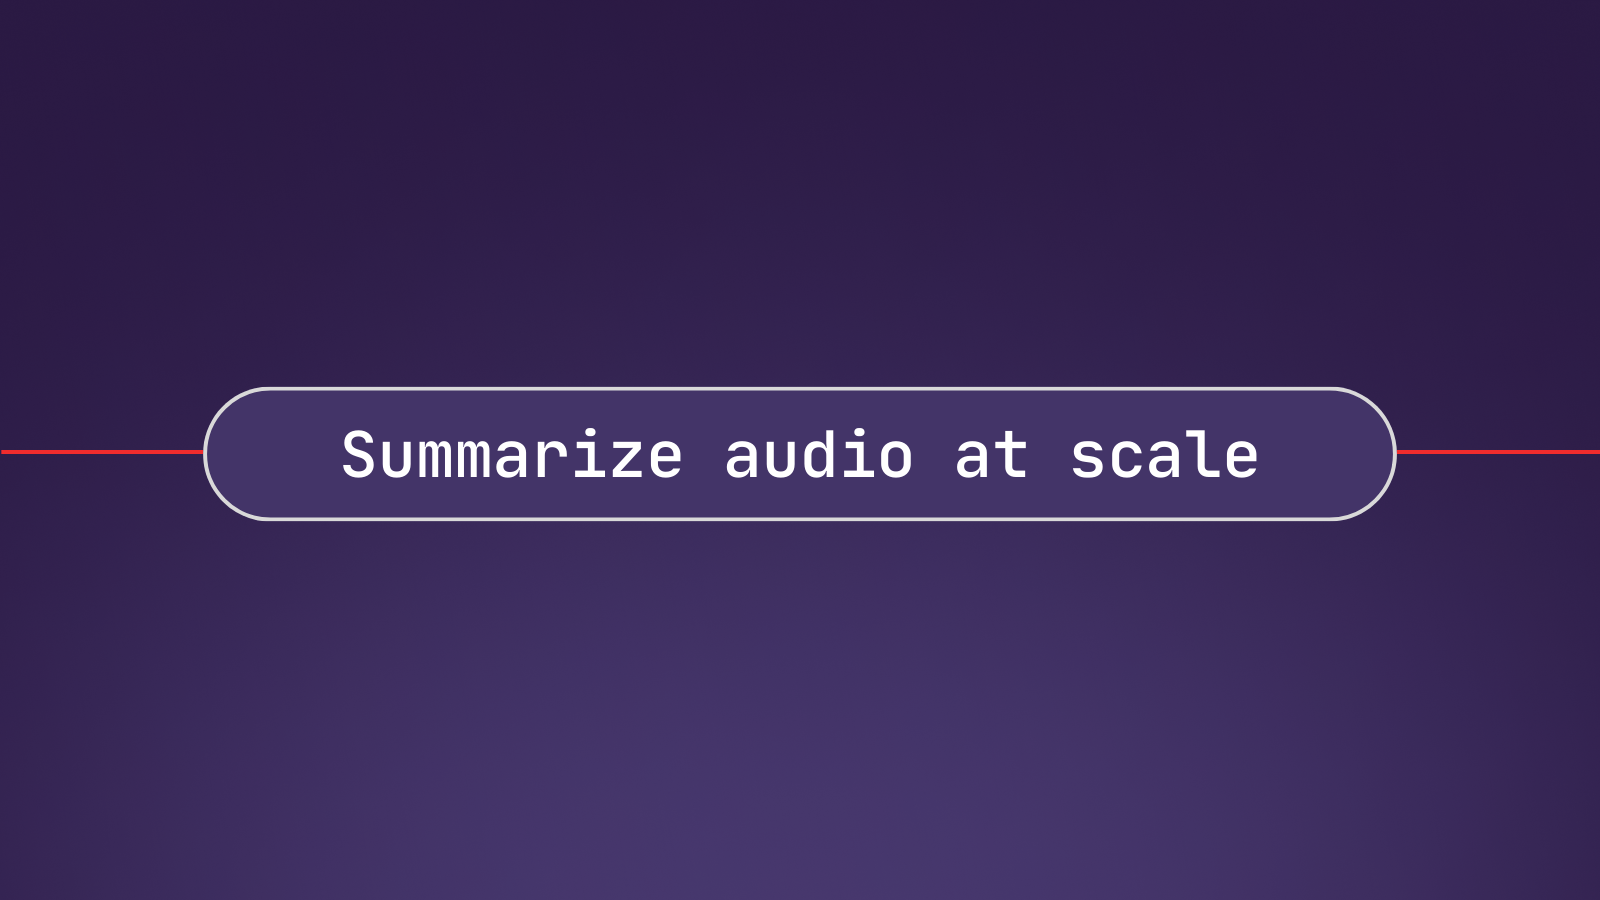 Automatically summarize audio and video files at scale with AI